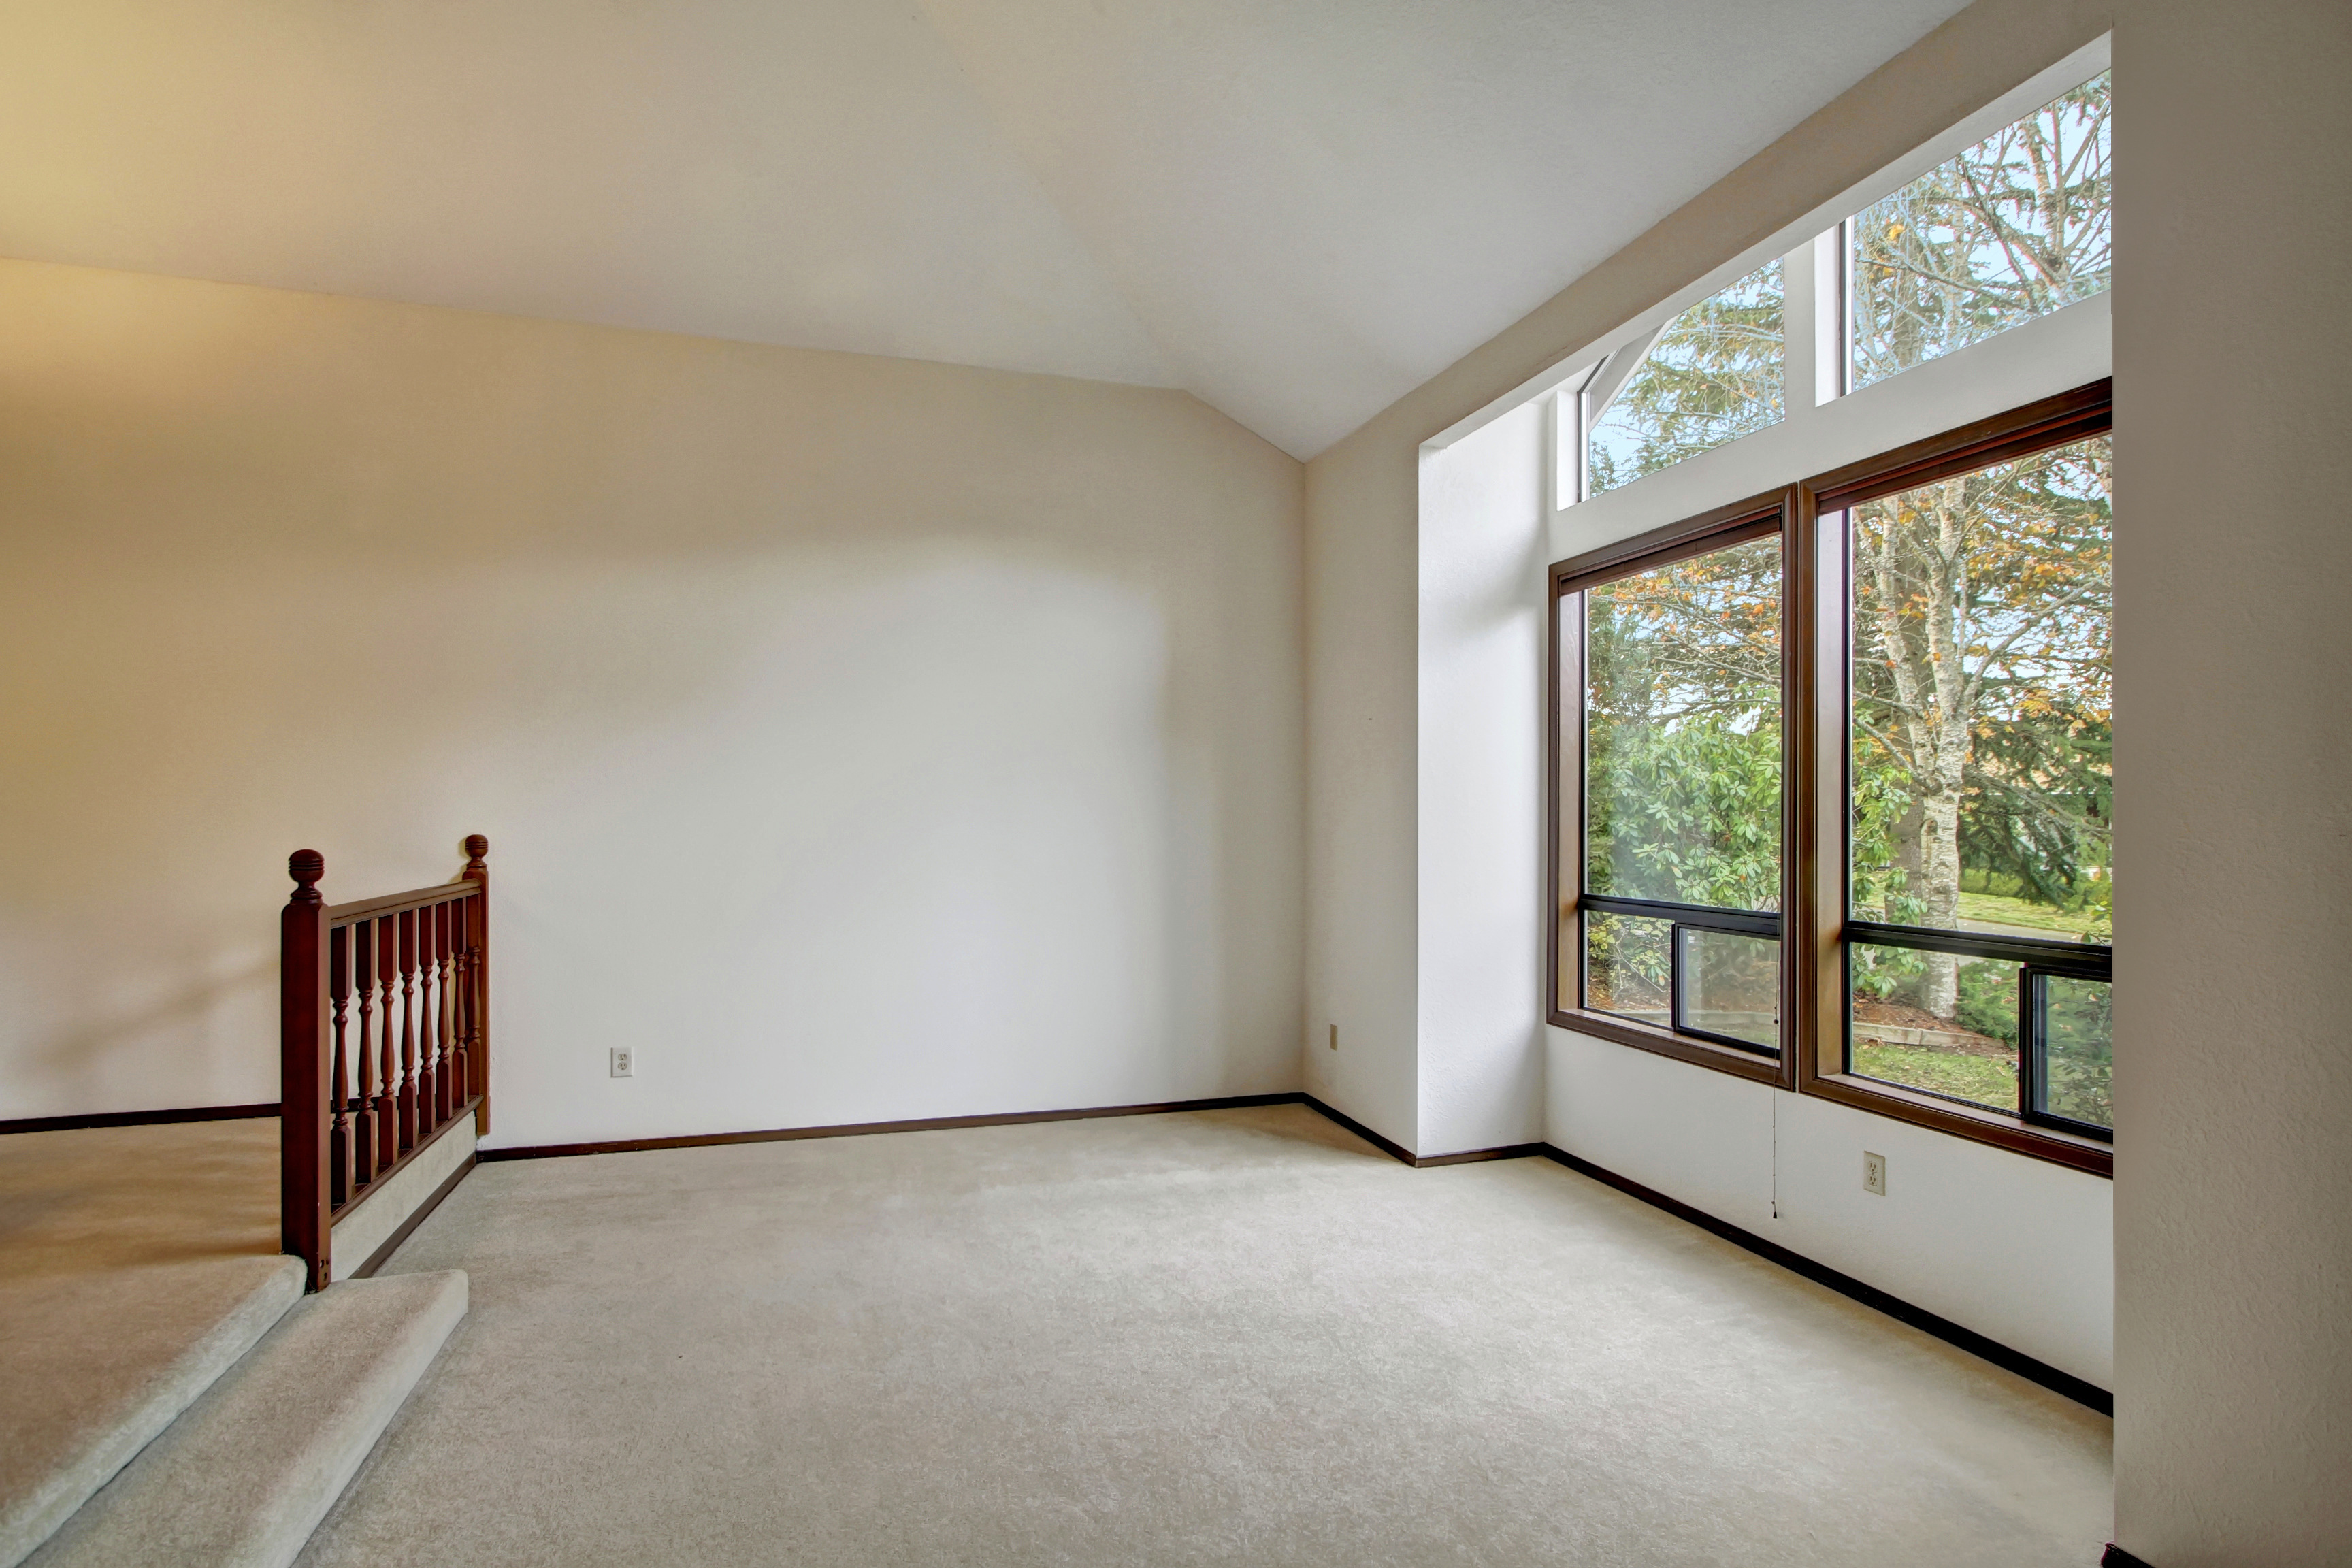 Property Photo: Living room 10323 53rd Ave W  WA 98275 